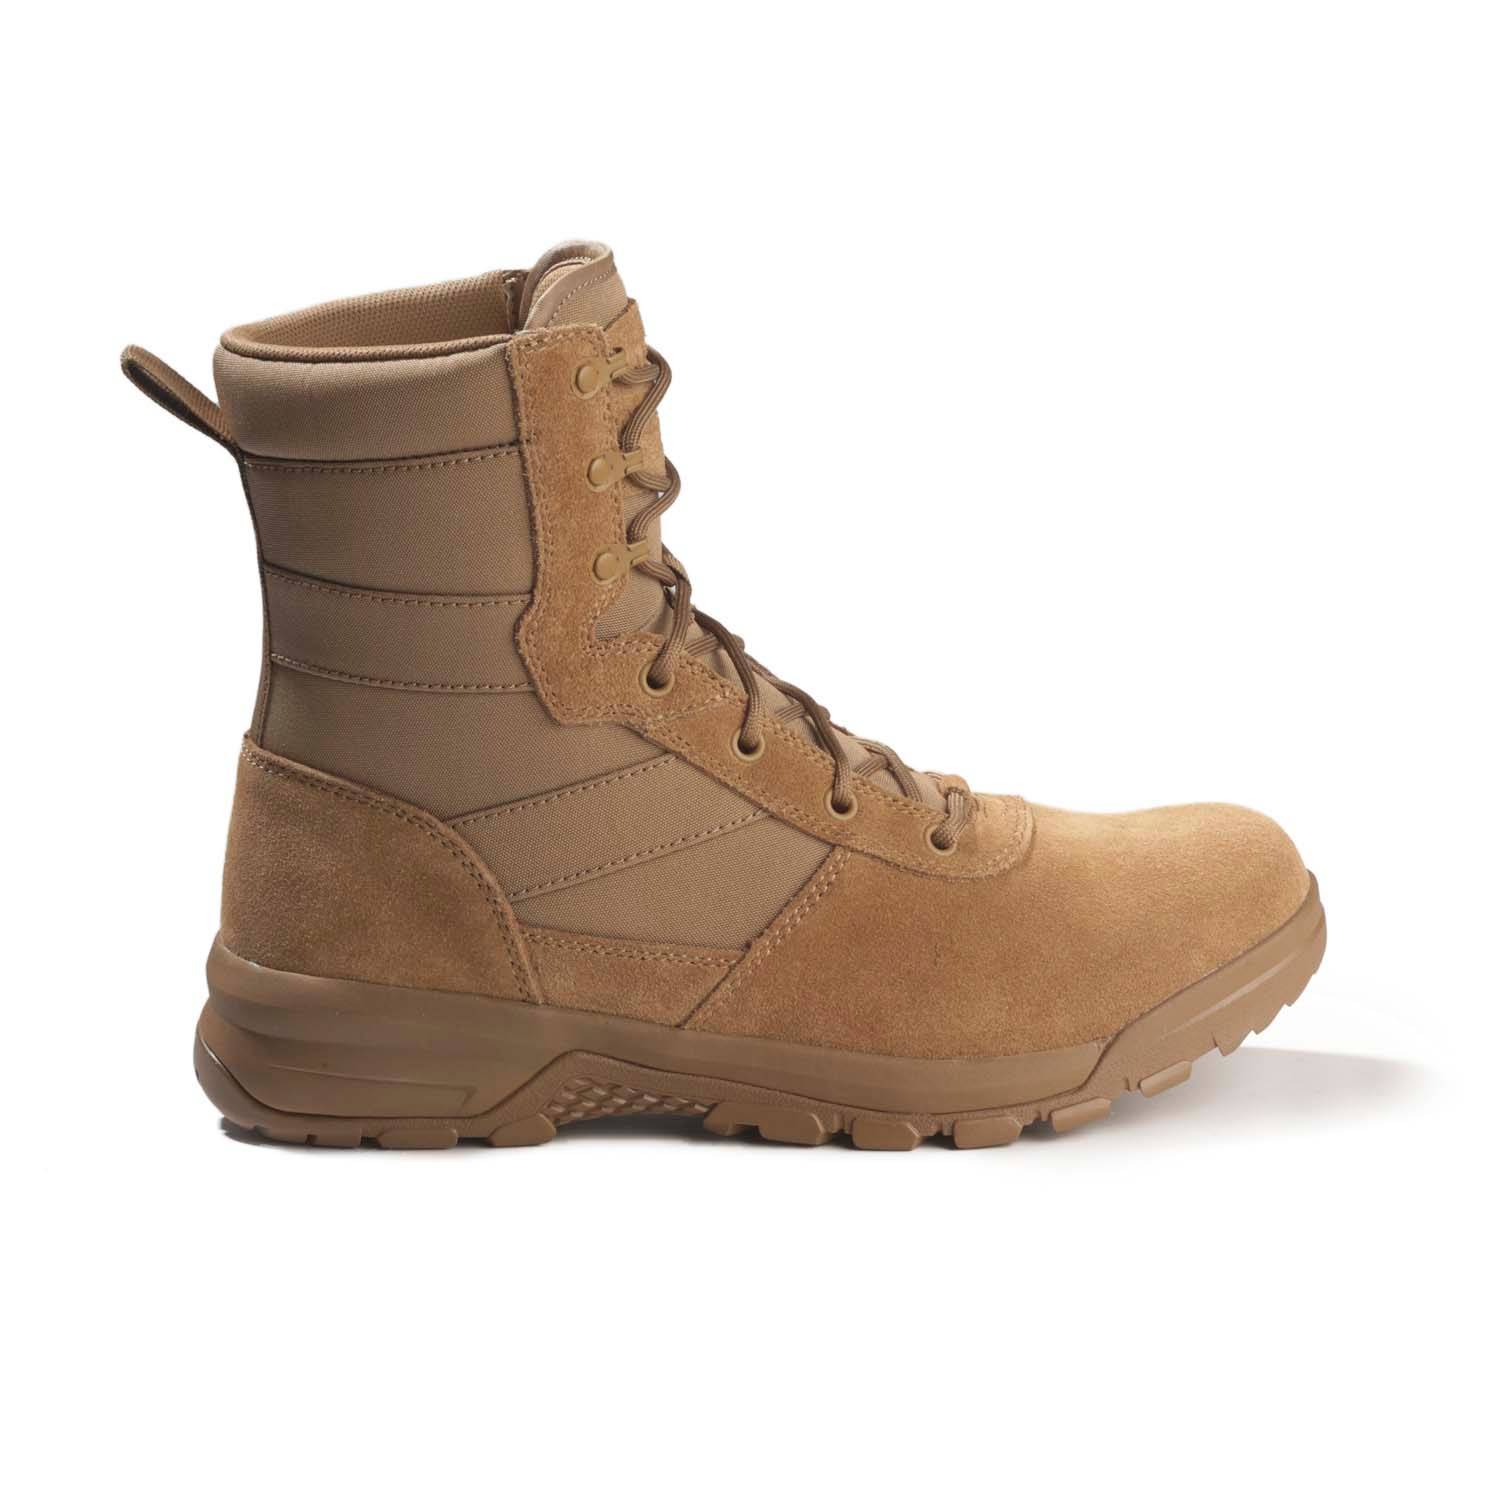 Belleville Spear Point 8" Hot Weather Tactical Boots